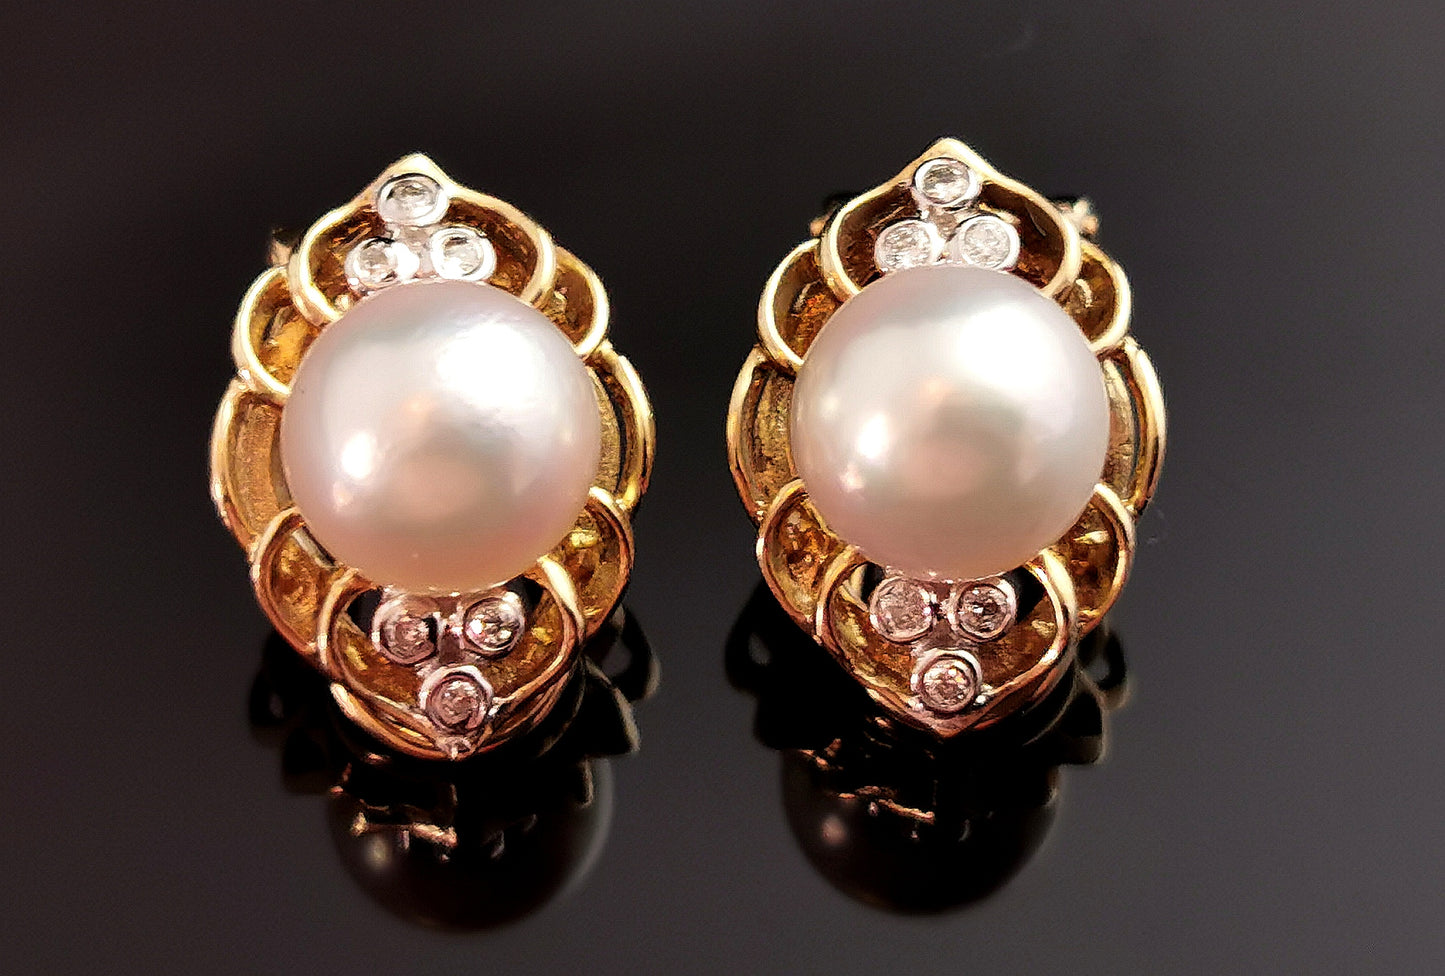 Vintage Cultured pearl and diamond clip earrings, 9k yellow gold